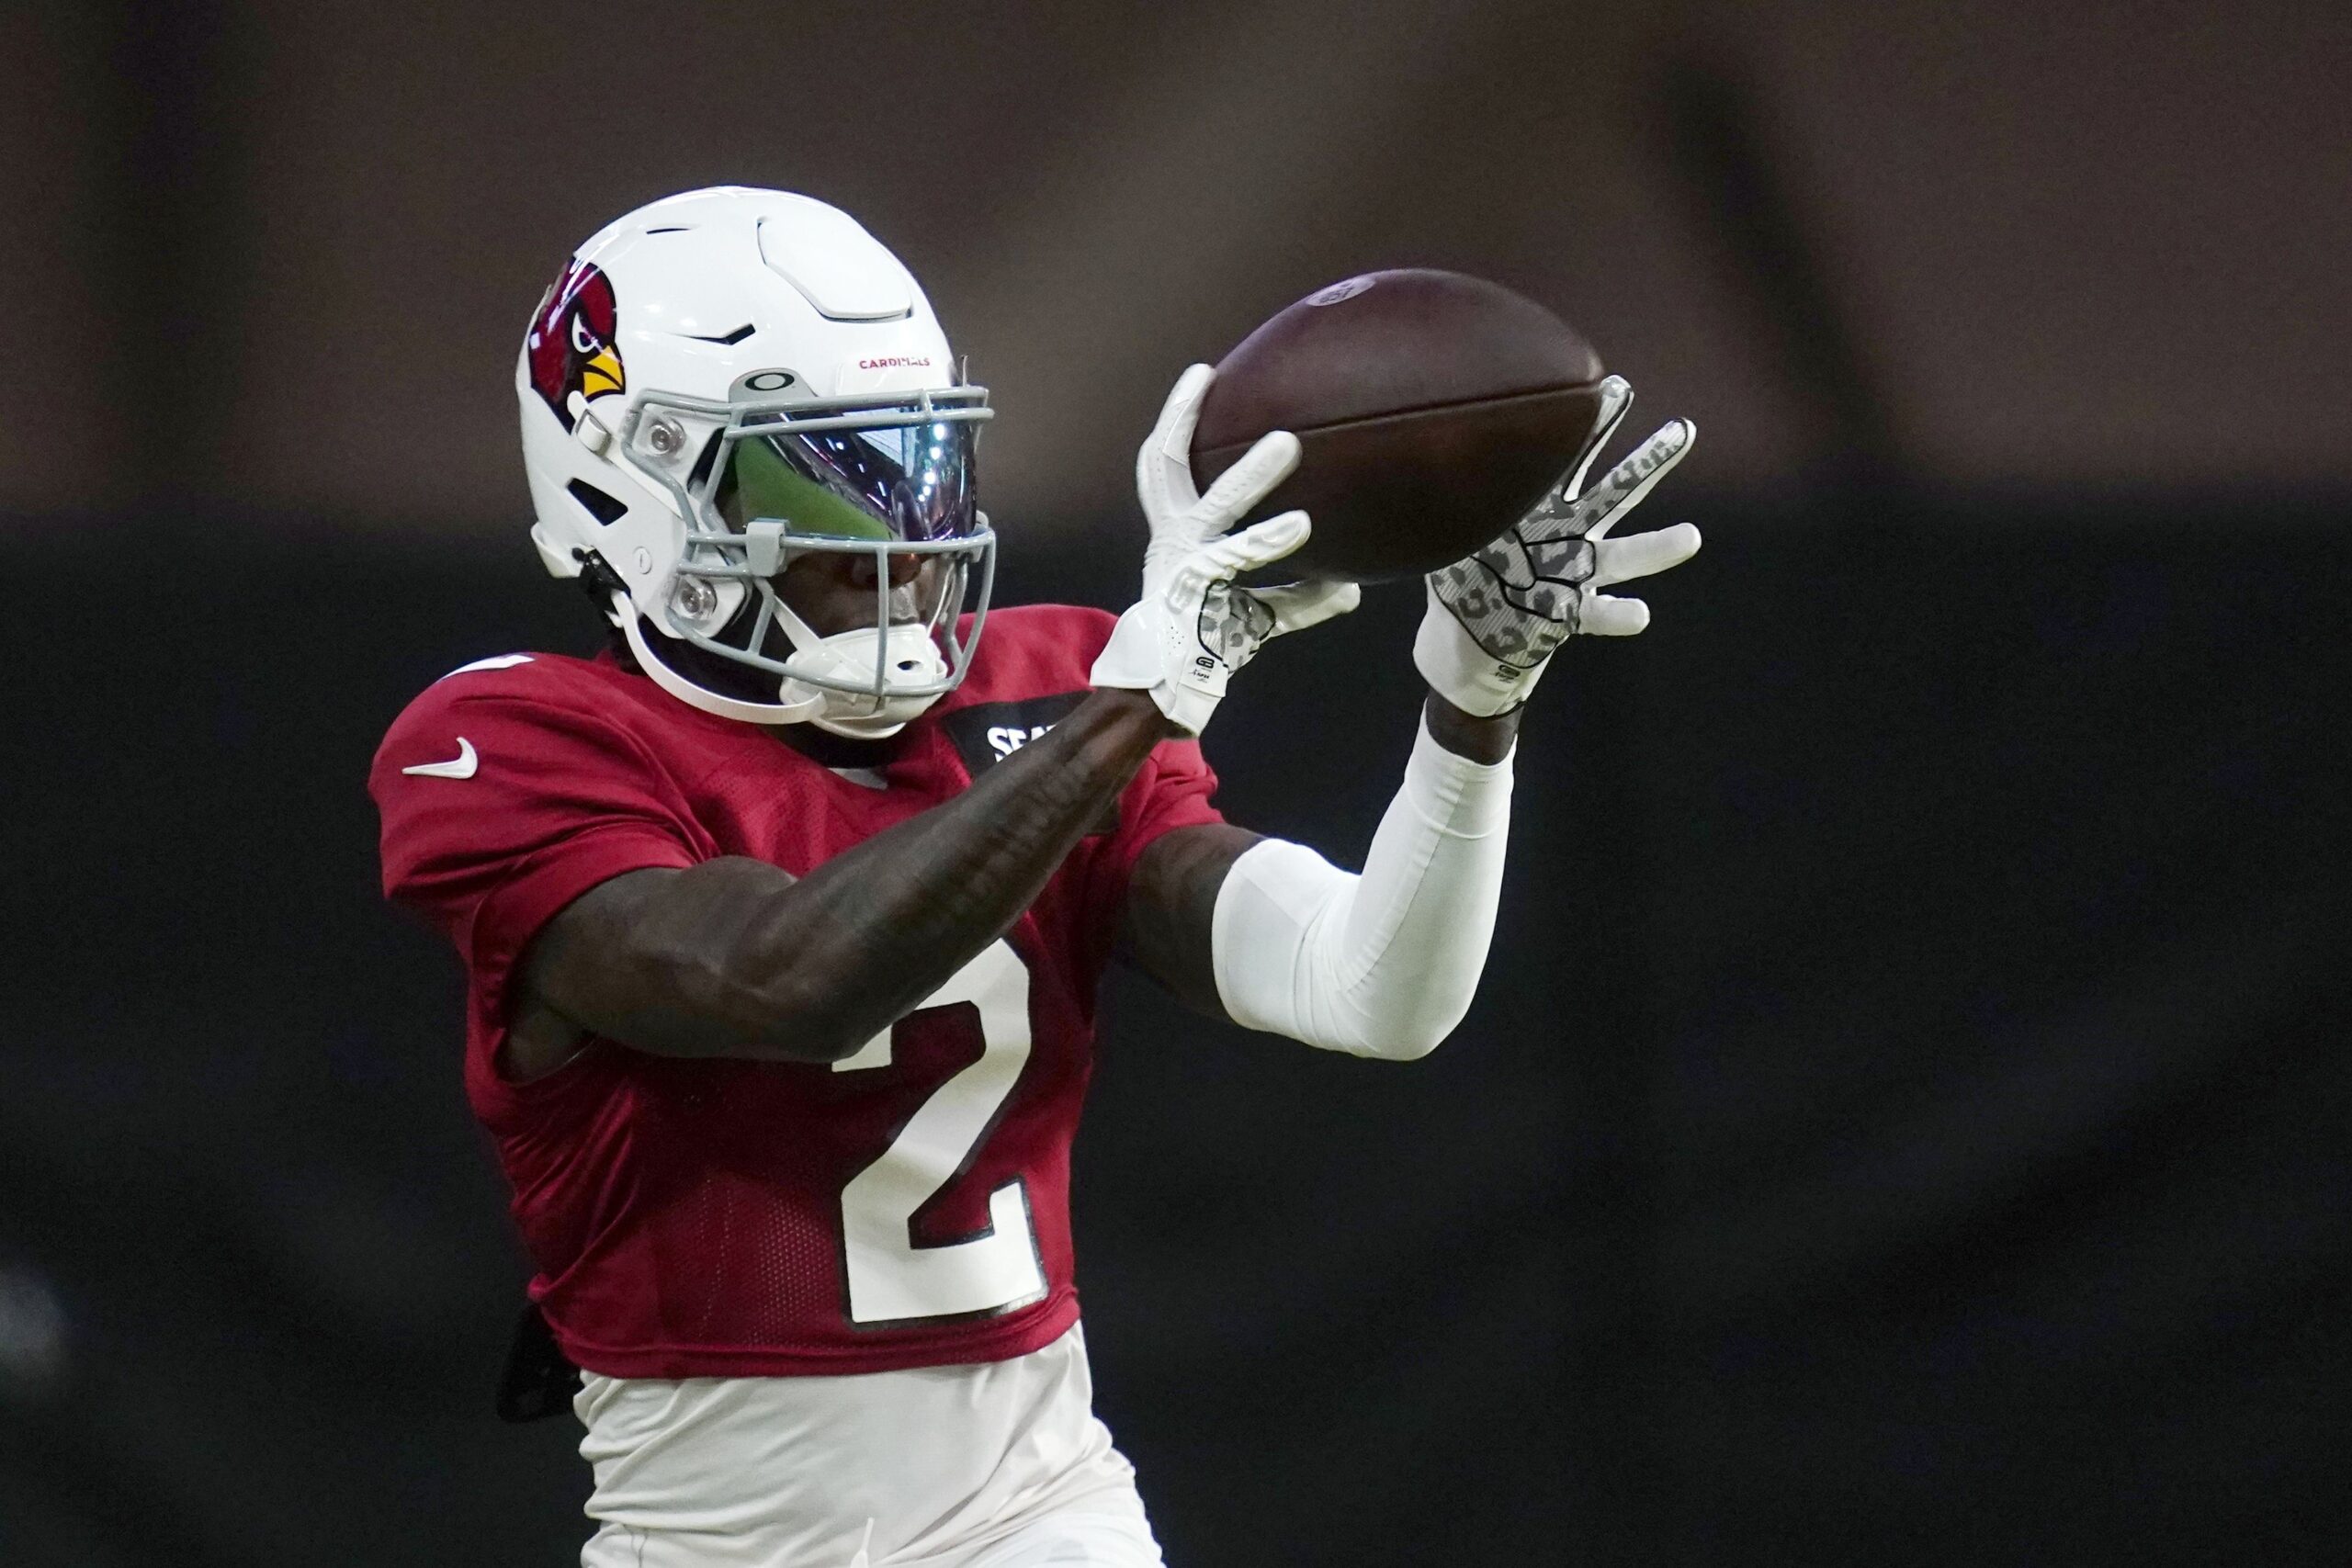 Hollywood Brown Injury Update: Will the Cardinals WR miss the entire year?